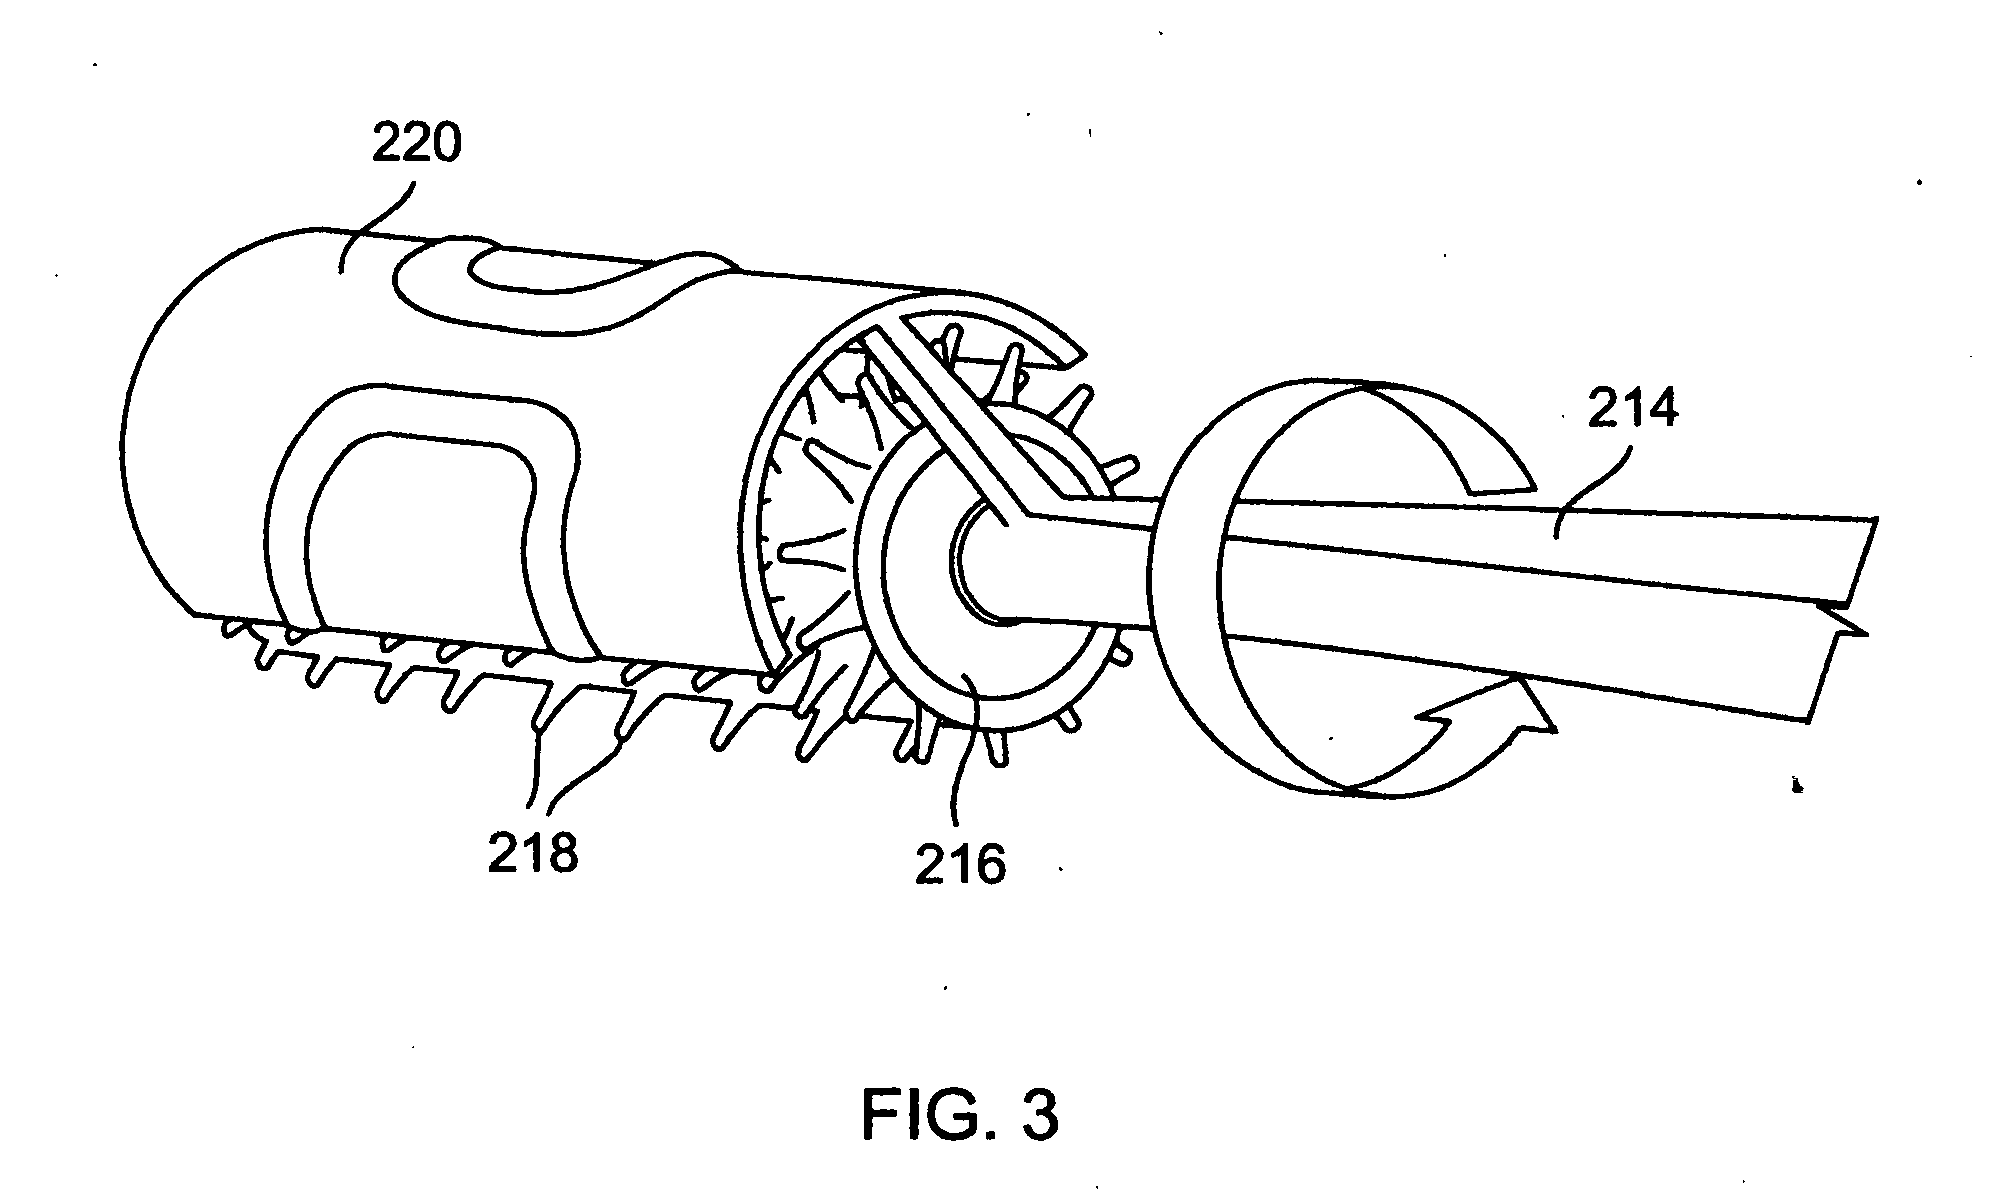 Tongue brush with powered roller